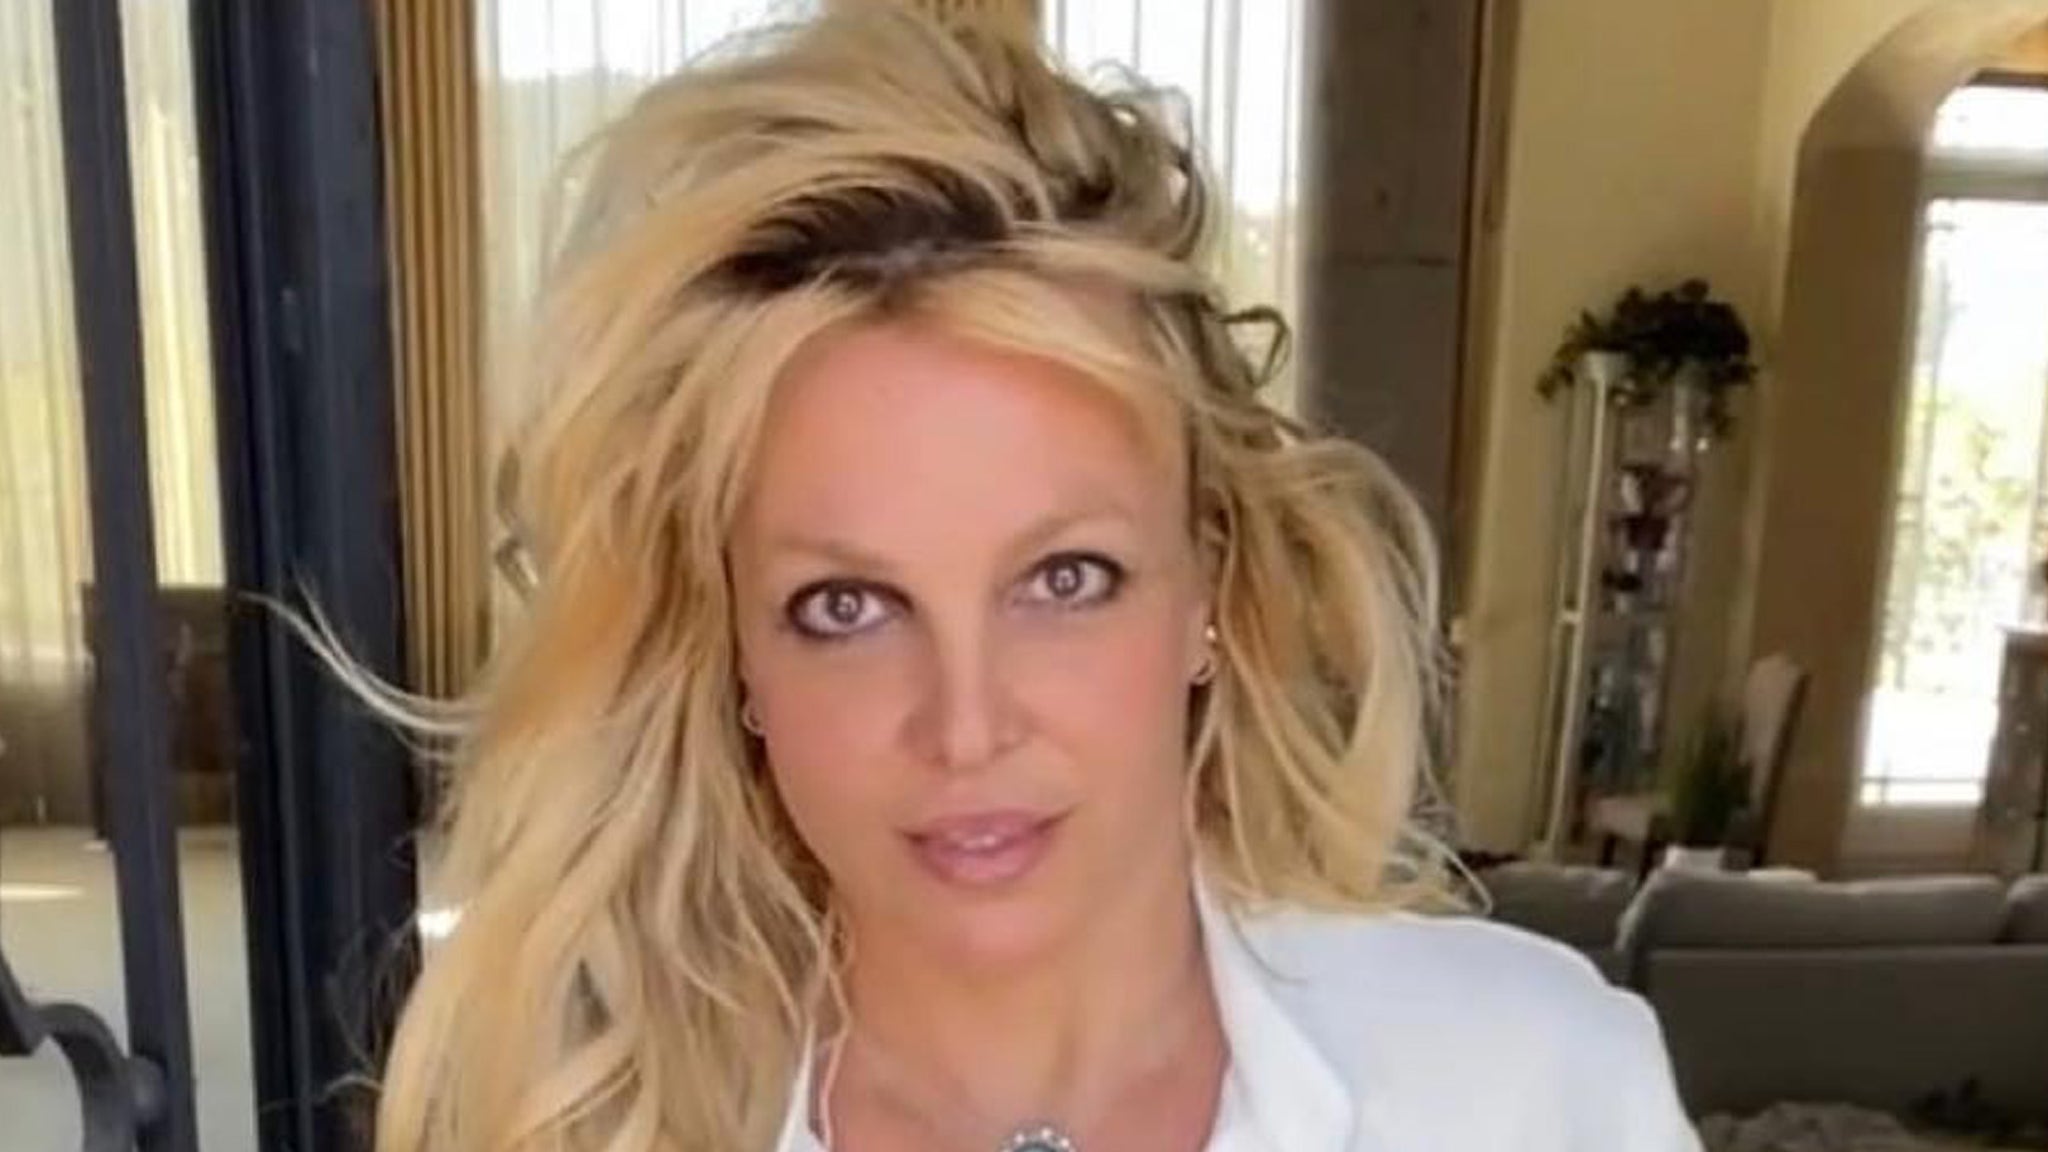 Britney Spears Reveals She Suffered a Miscarriage: 'We Have Lost Our Miracle Baby'